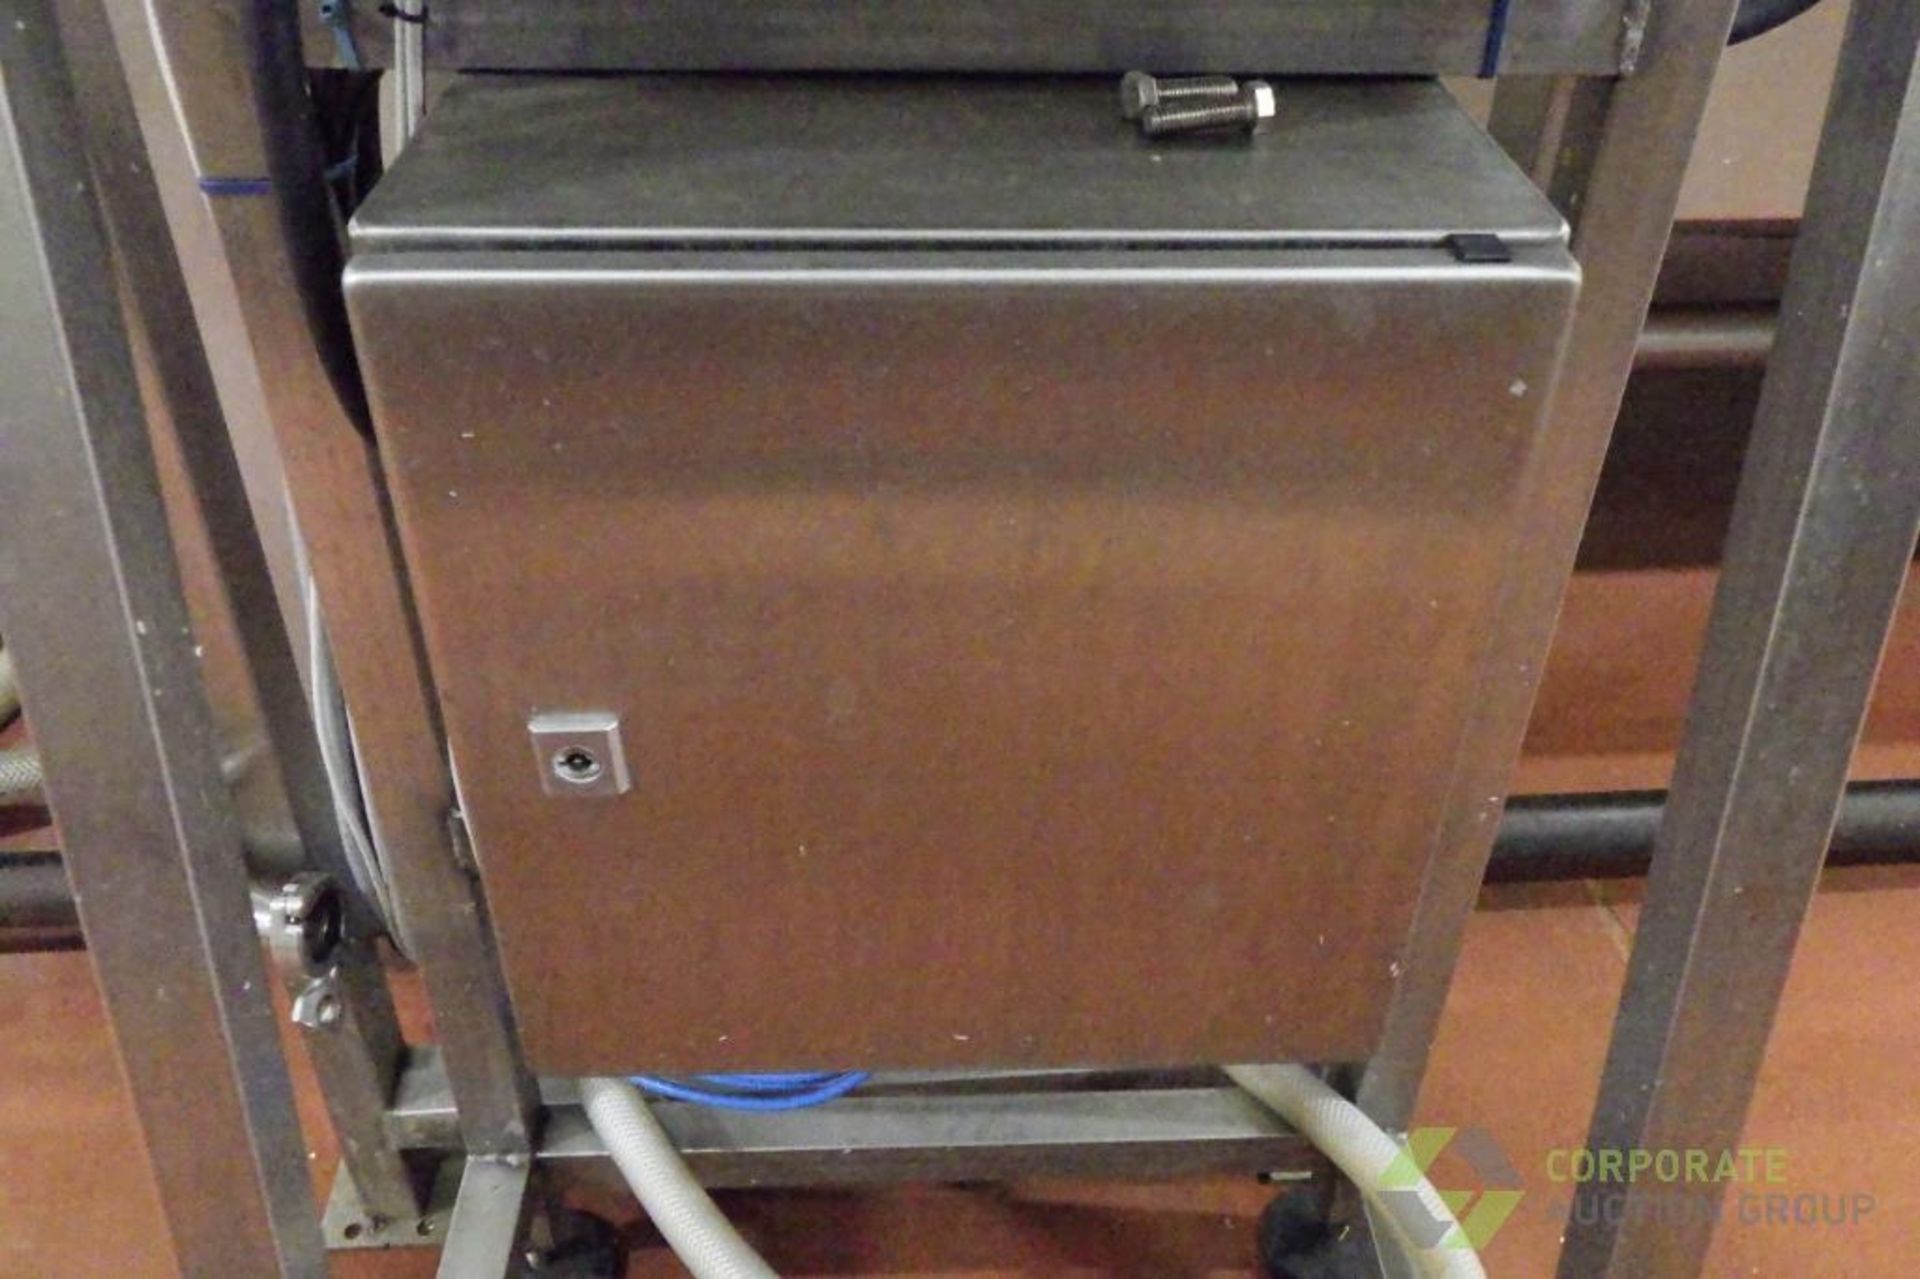 2022 Hellenic Food Machinery Drum Blancher w/ Exhaust Hood, Control Panel, 575V - Image 35 of 41